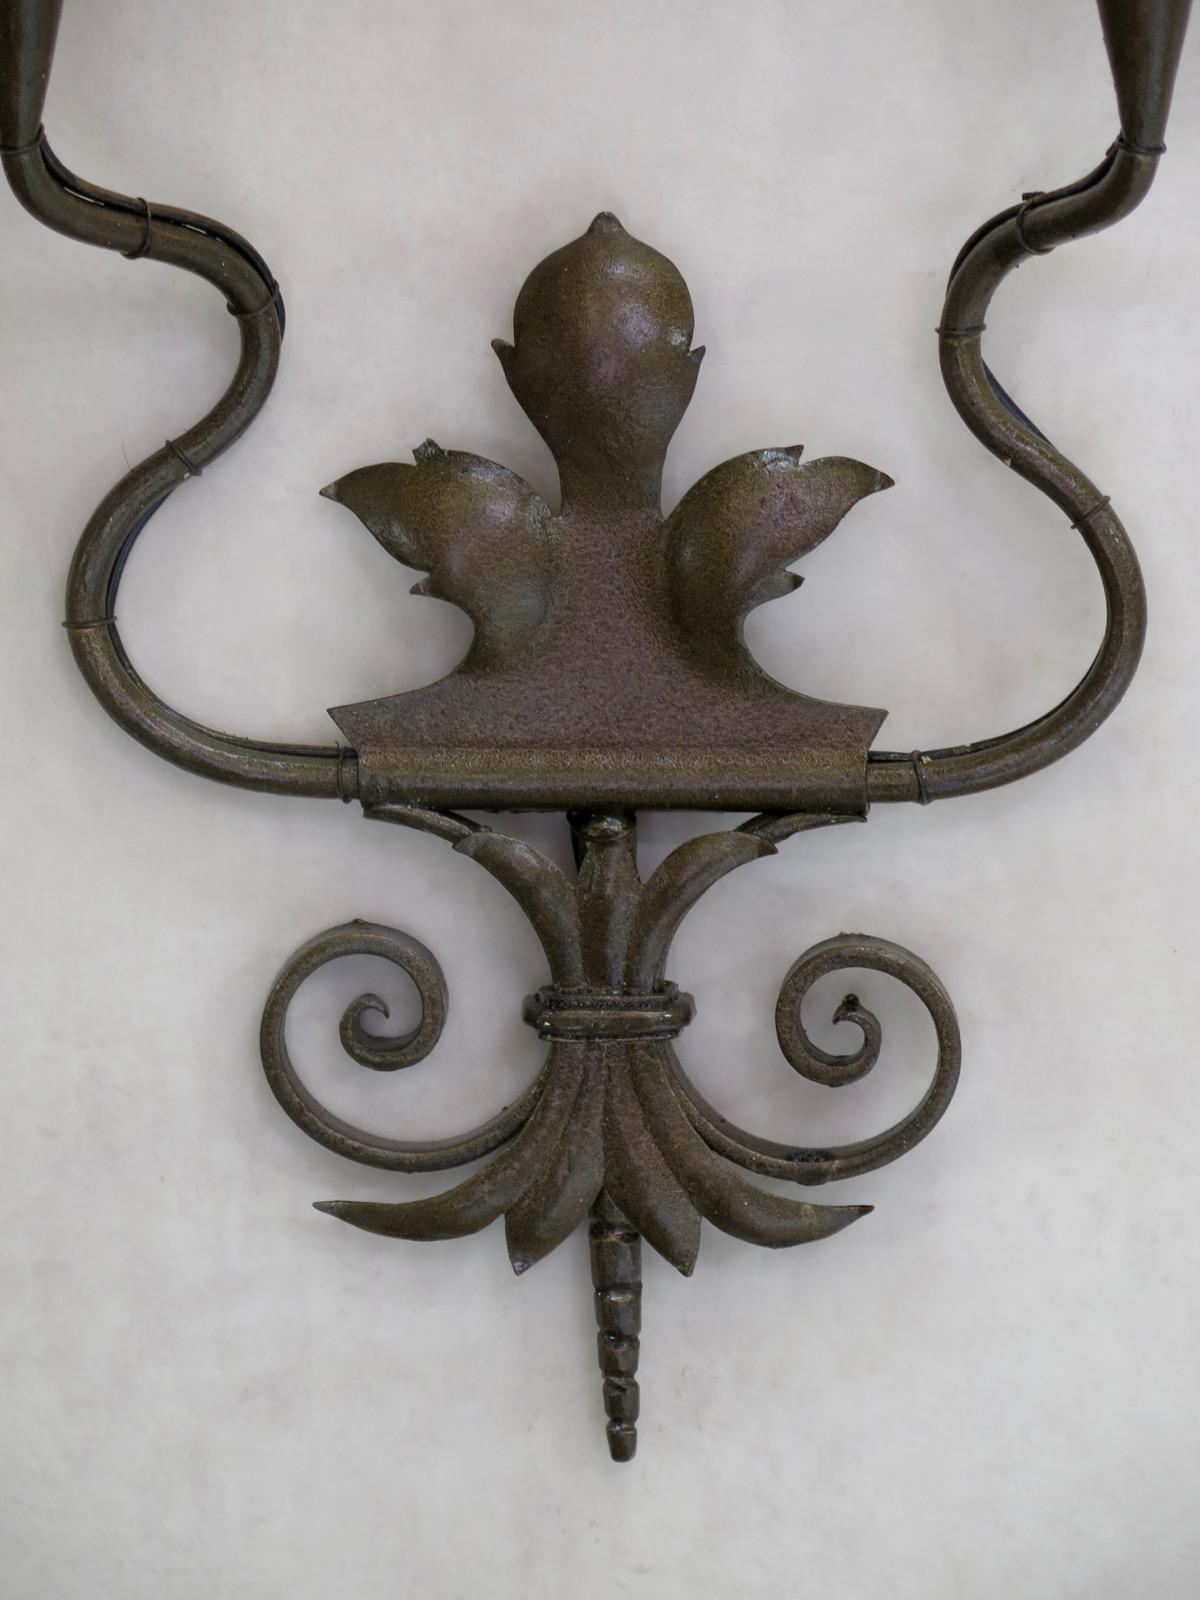 Tall wall light, with cut-out acanthus-leaf motif, and painted with a bronze-colored finish.